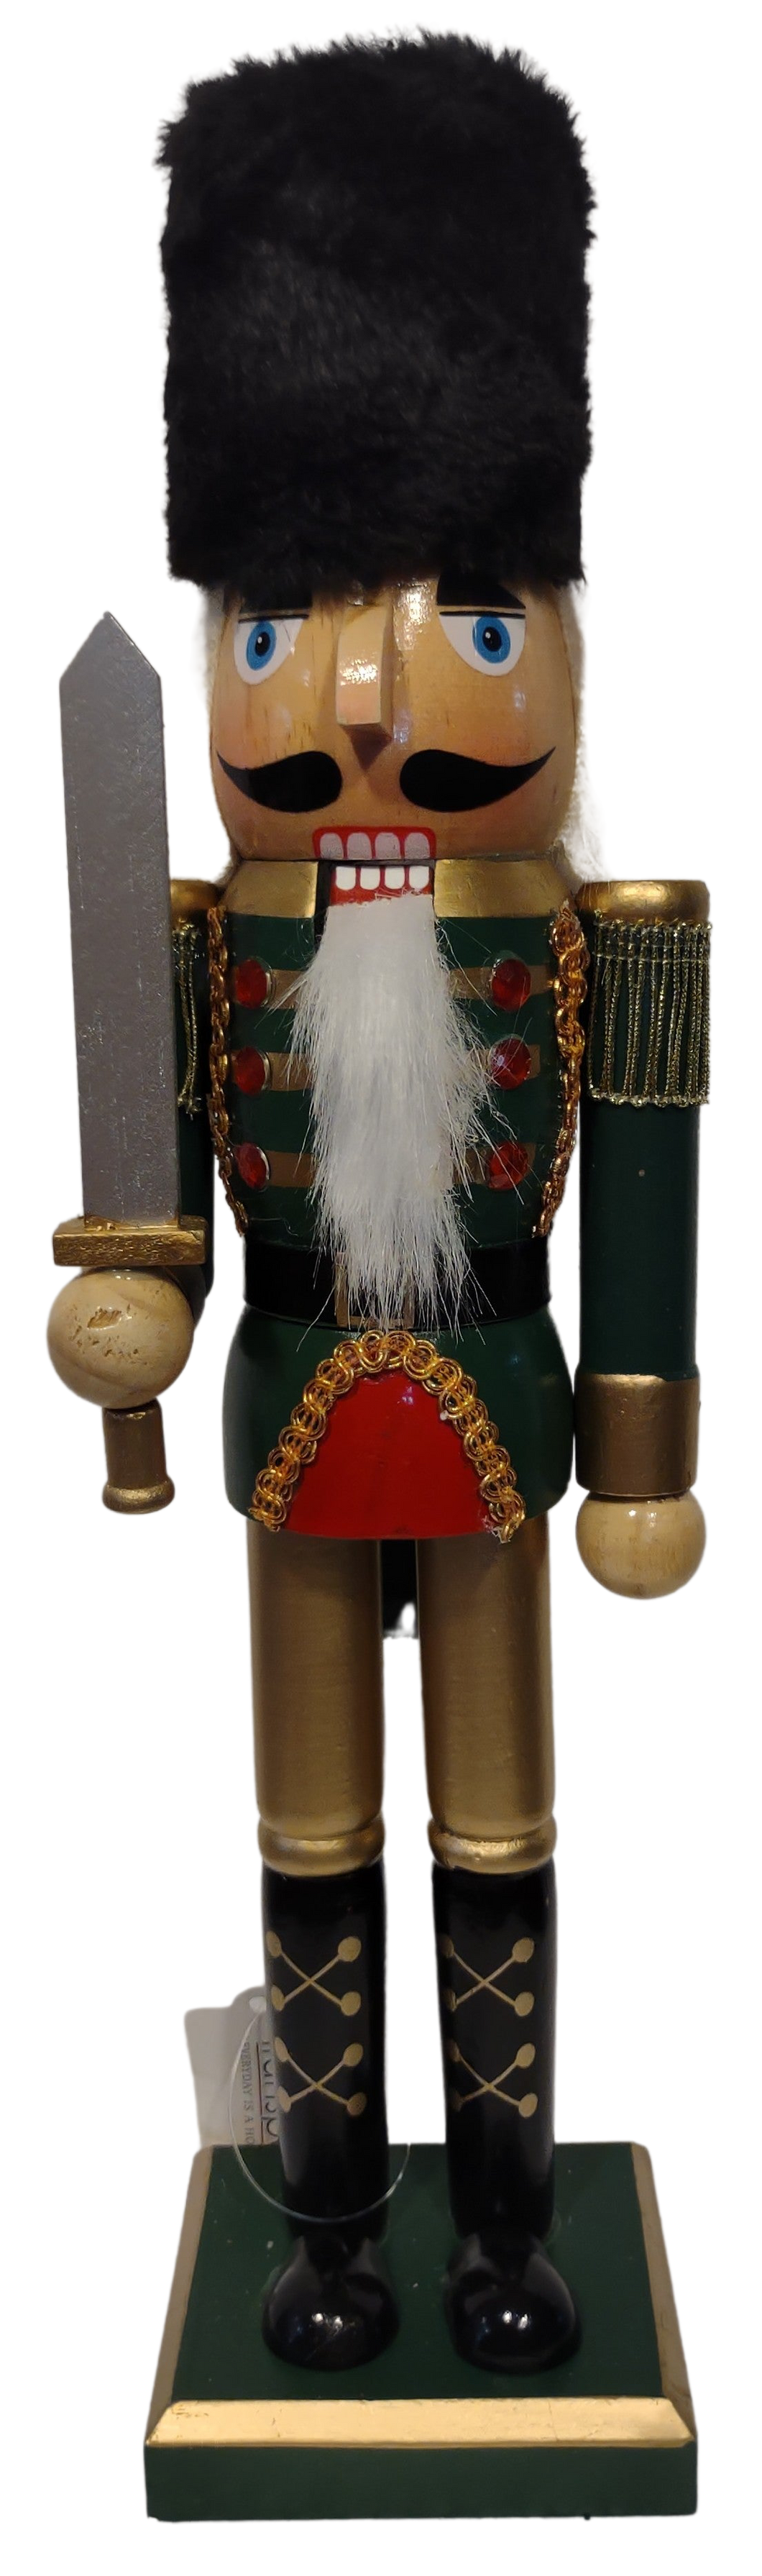 Wooden Royal Nutcracker Green/Gold/Red with Black Hat & Sword 15